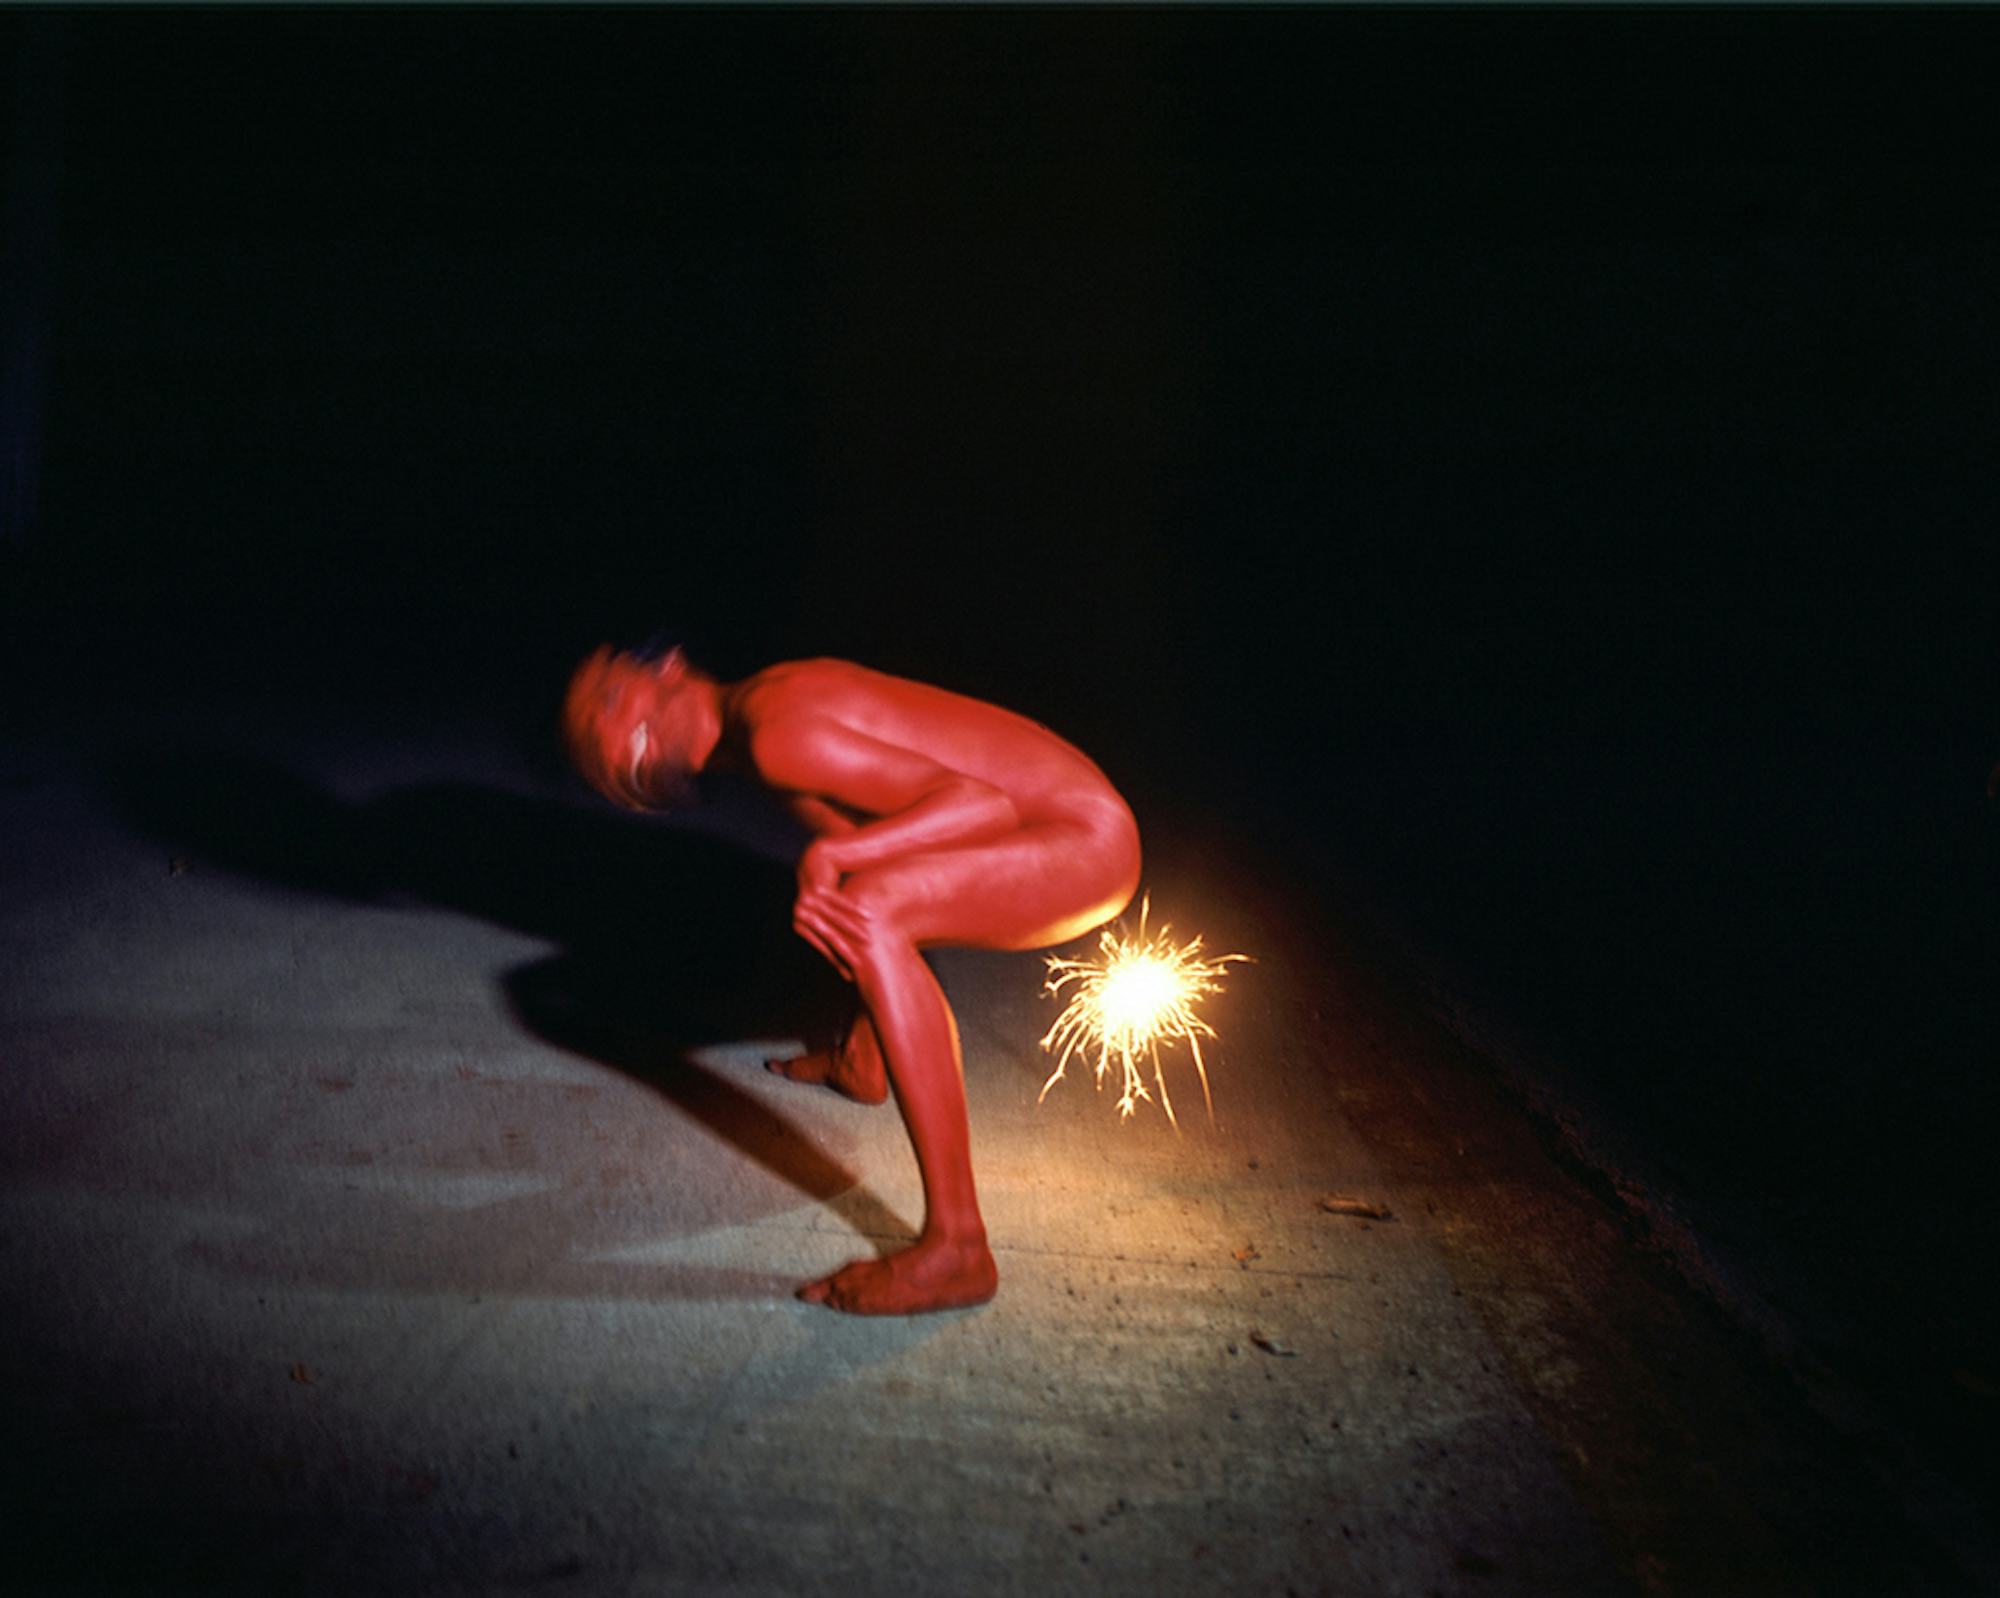 Picture of a squatting person, coloured red, that appears to be pooping fireworks © Cansu Yıldıran